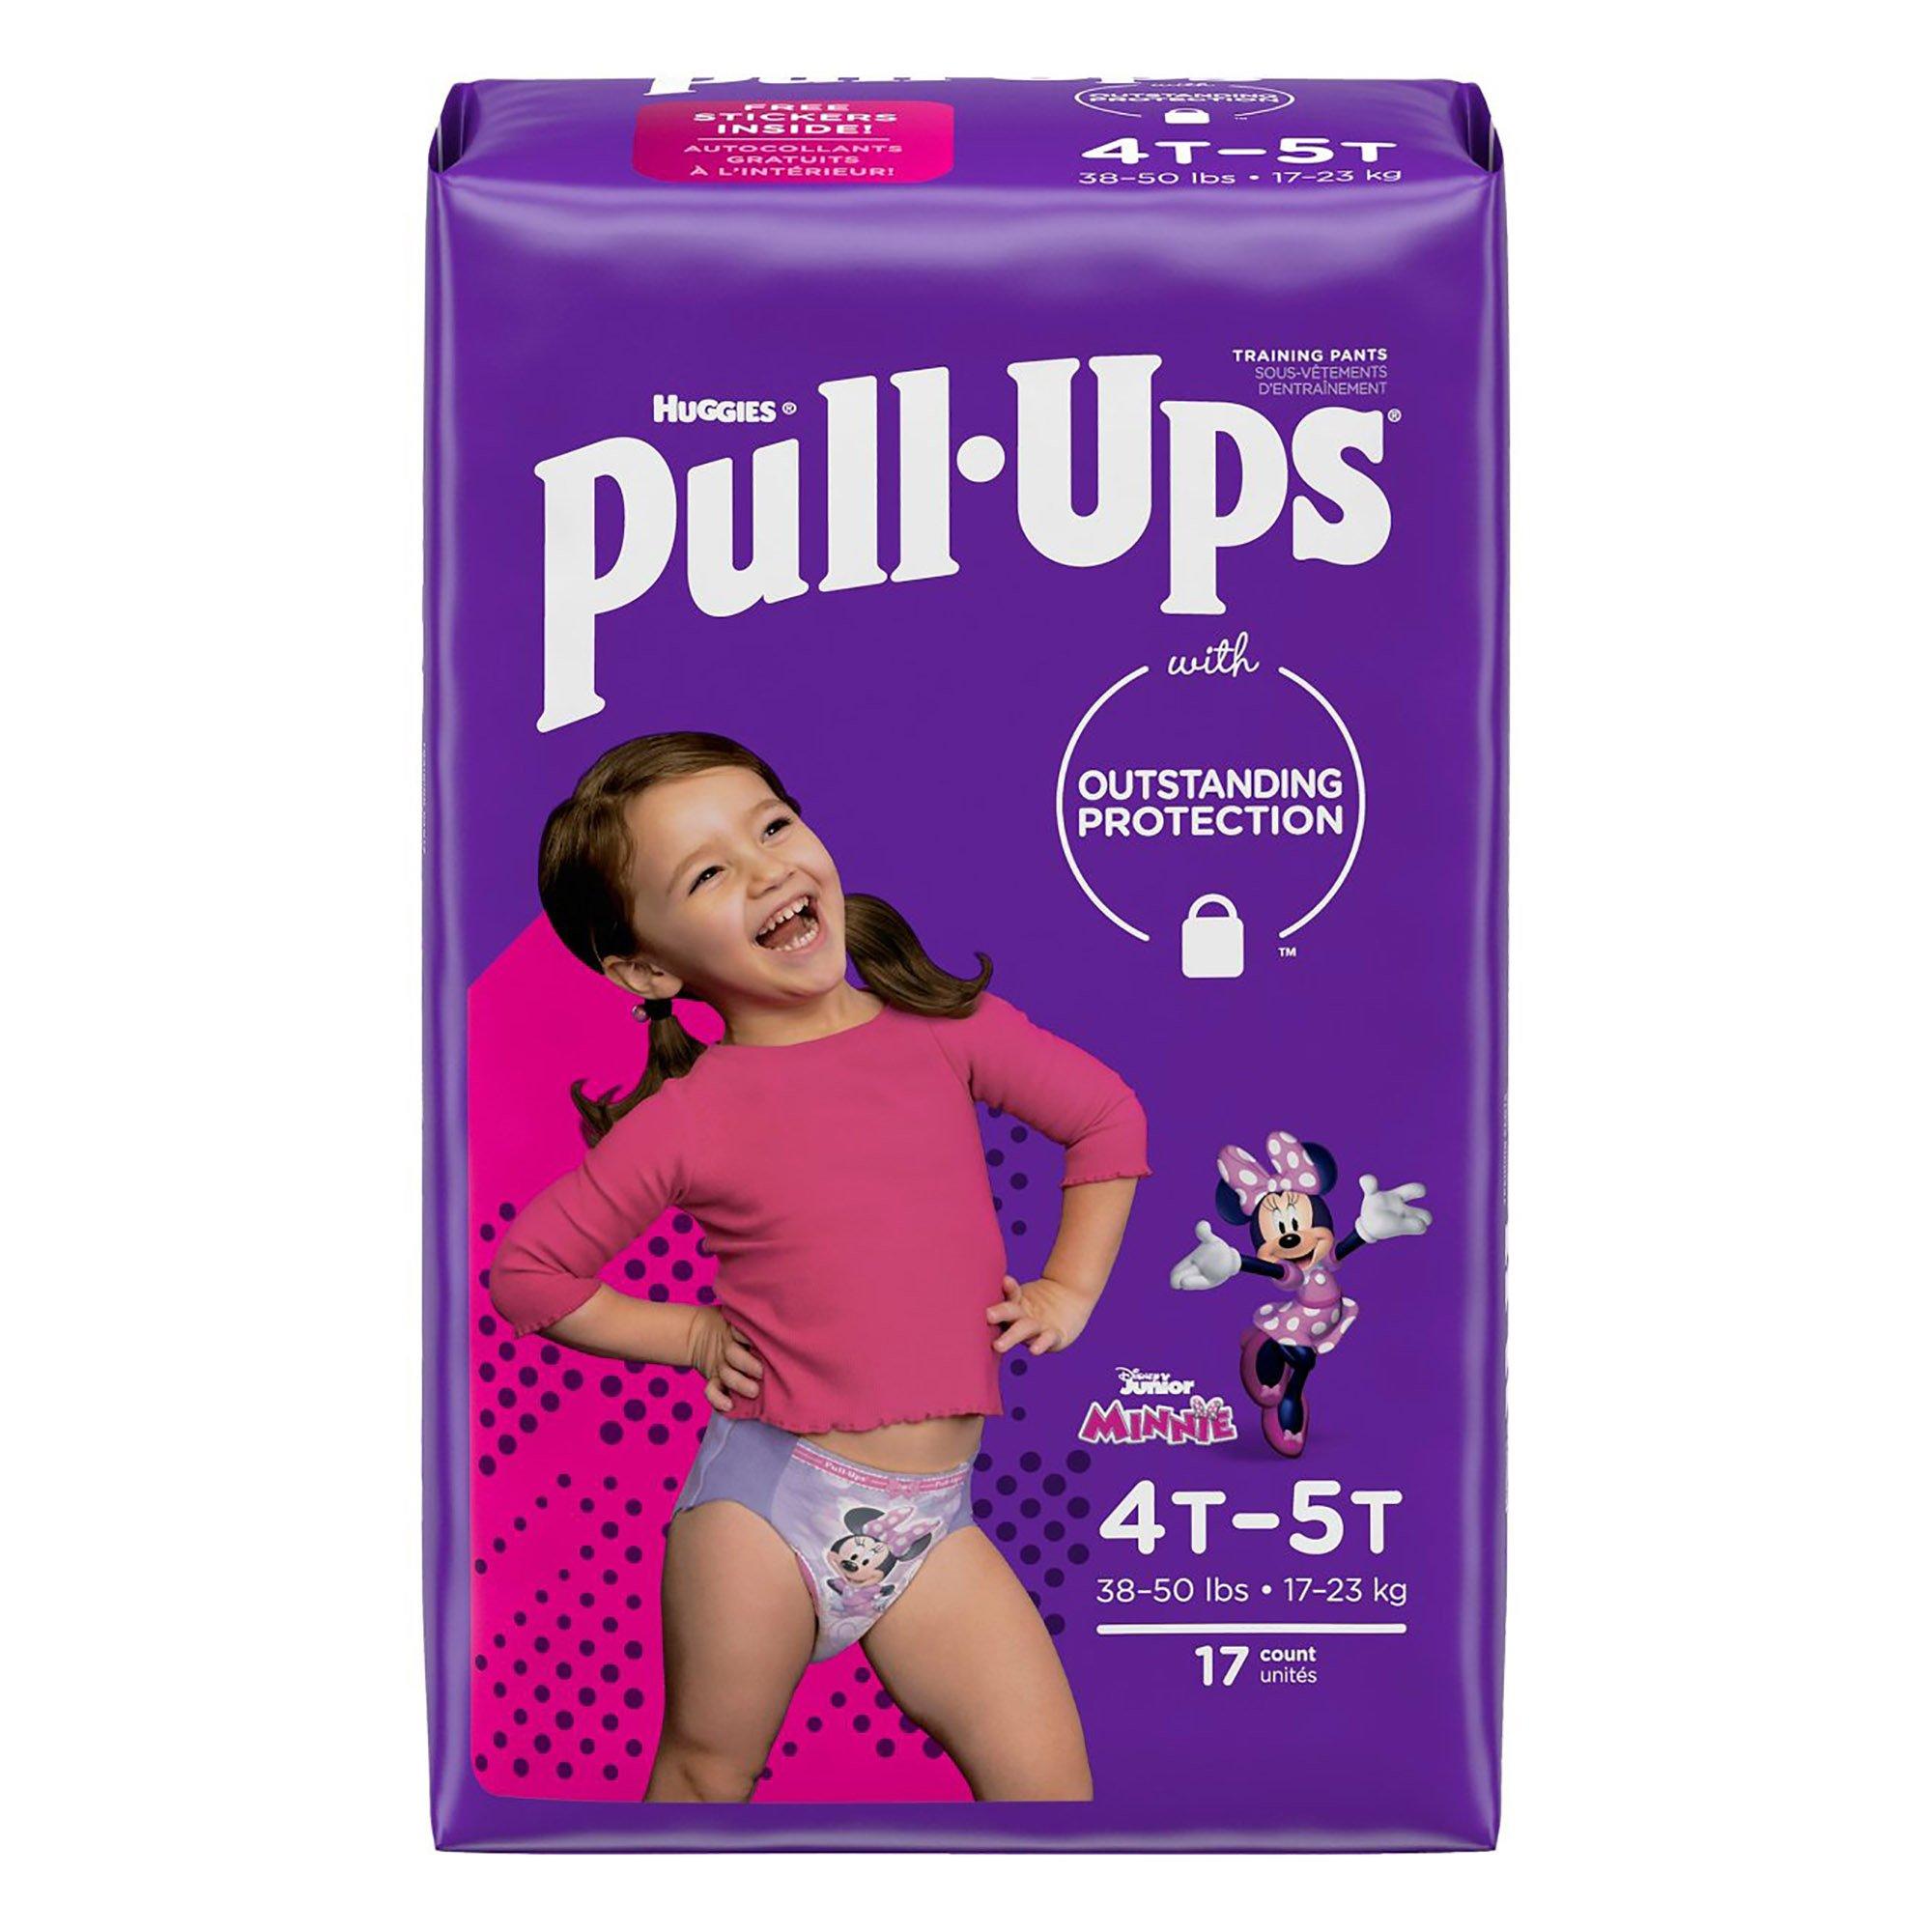 Huggies Girls Pull-Ups with Outstanding Protection, Moderate Absorbency